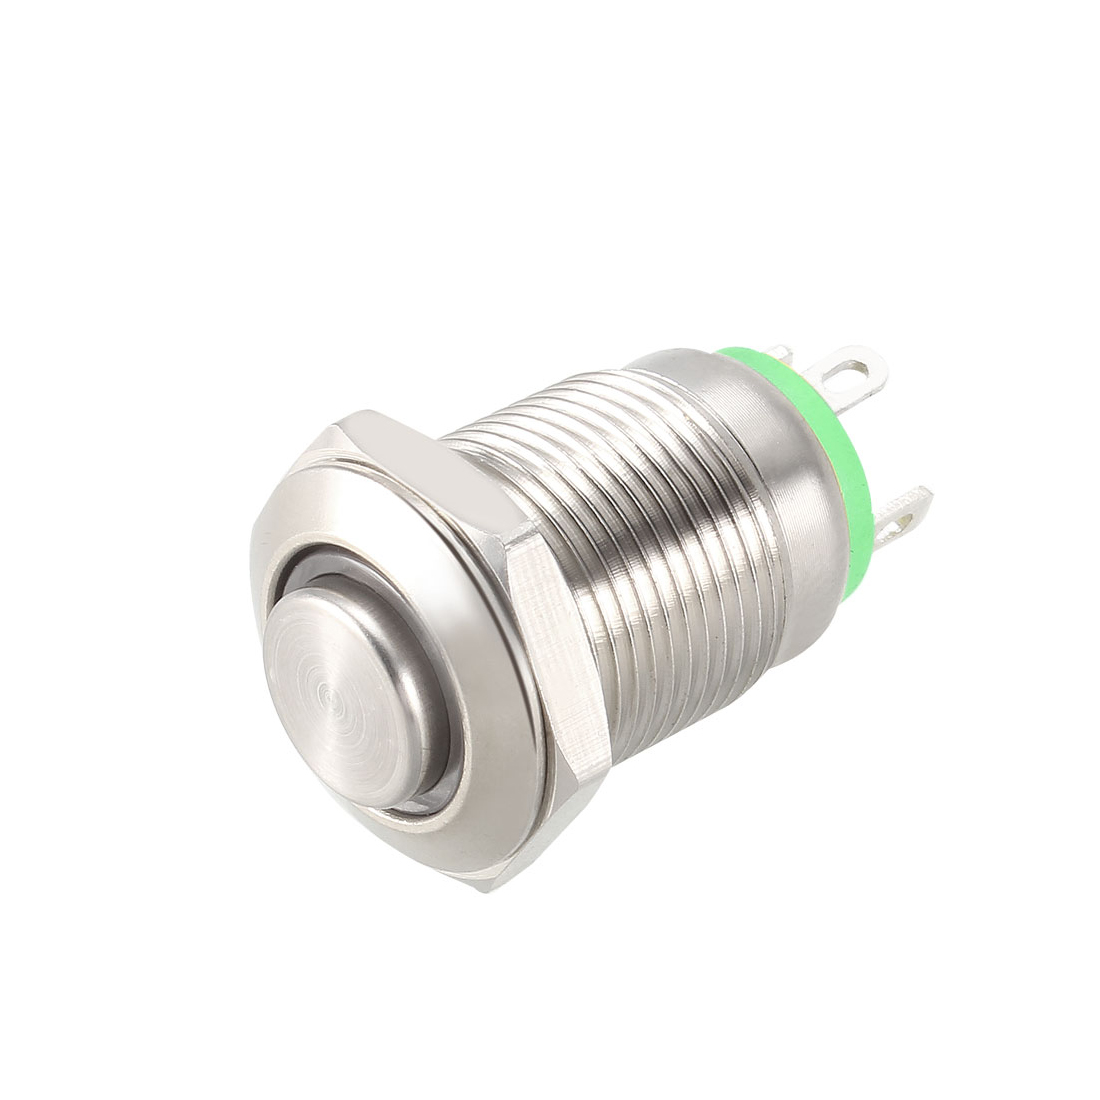 Unique Bargains Momentary Metal Push Button Switch High Head 12mm Mounting 1NO 3-6V Green LED